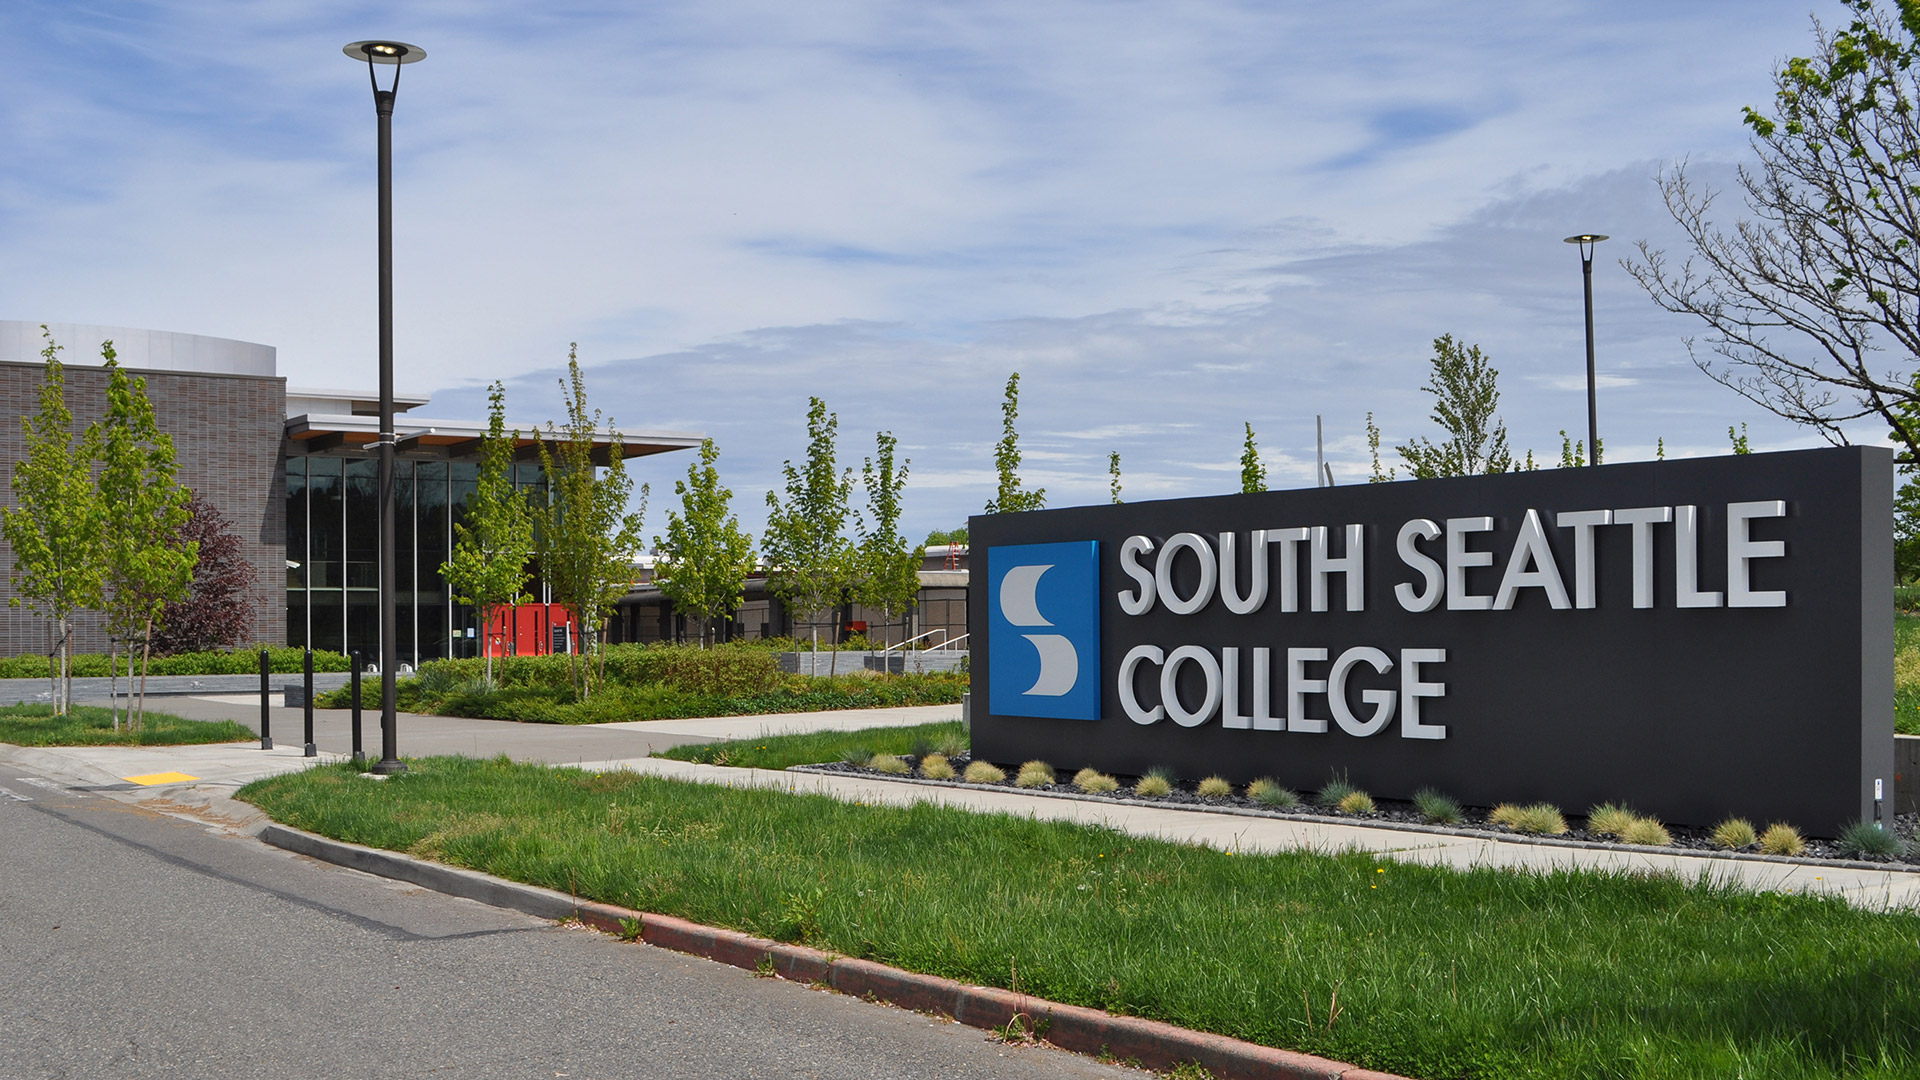 We are proud to support South Seattle College